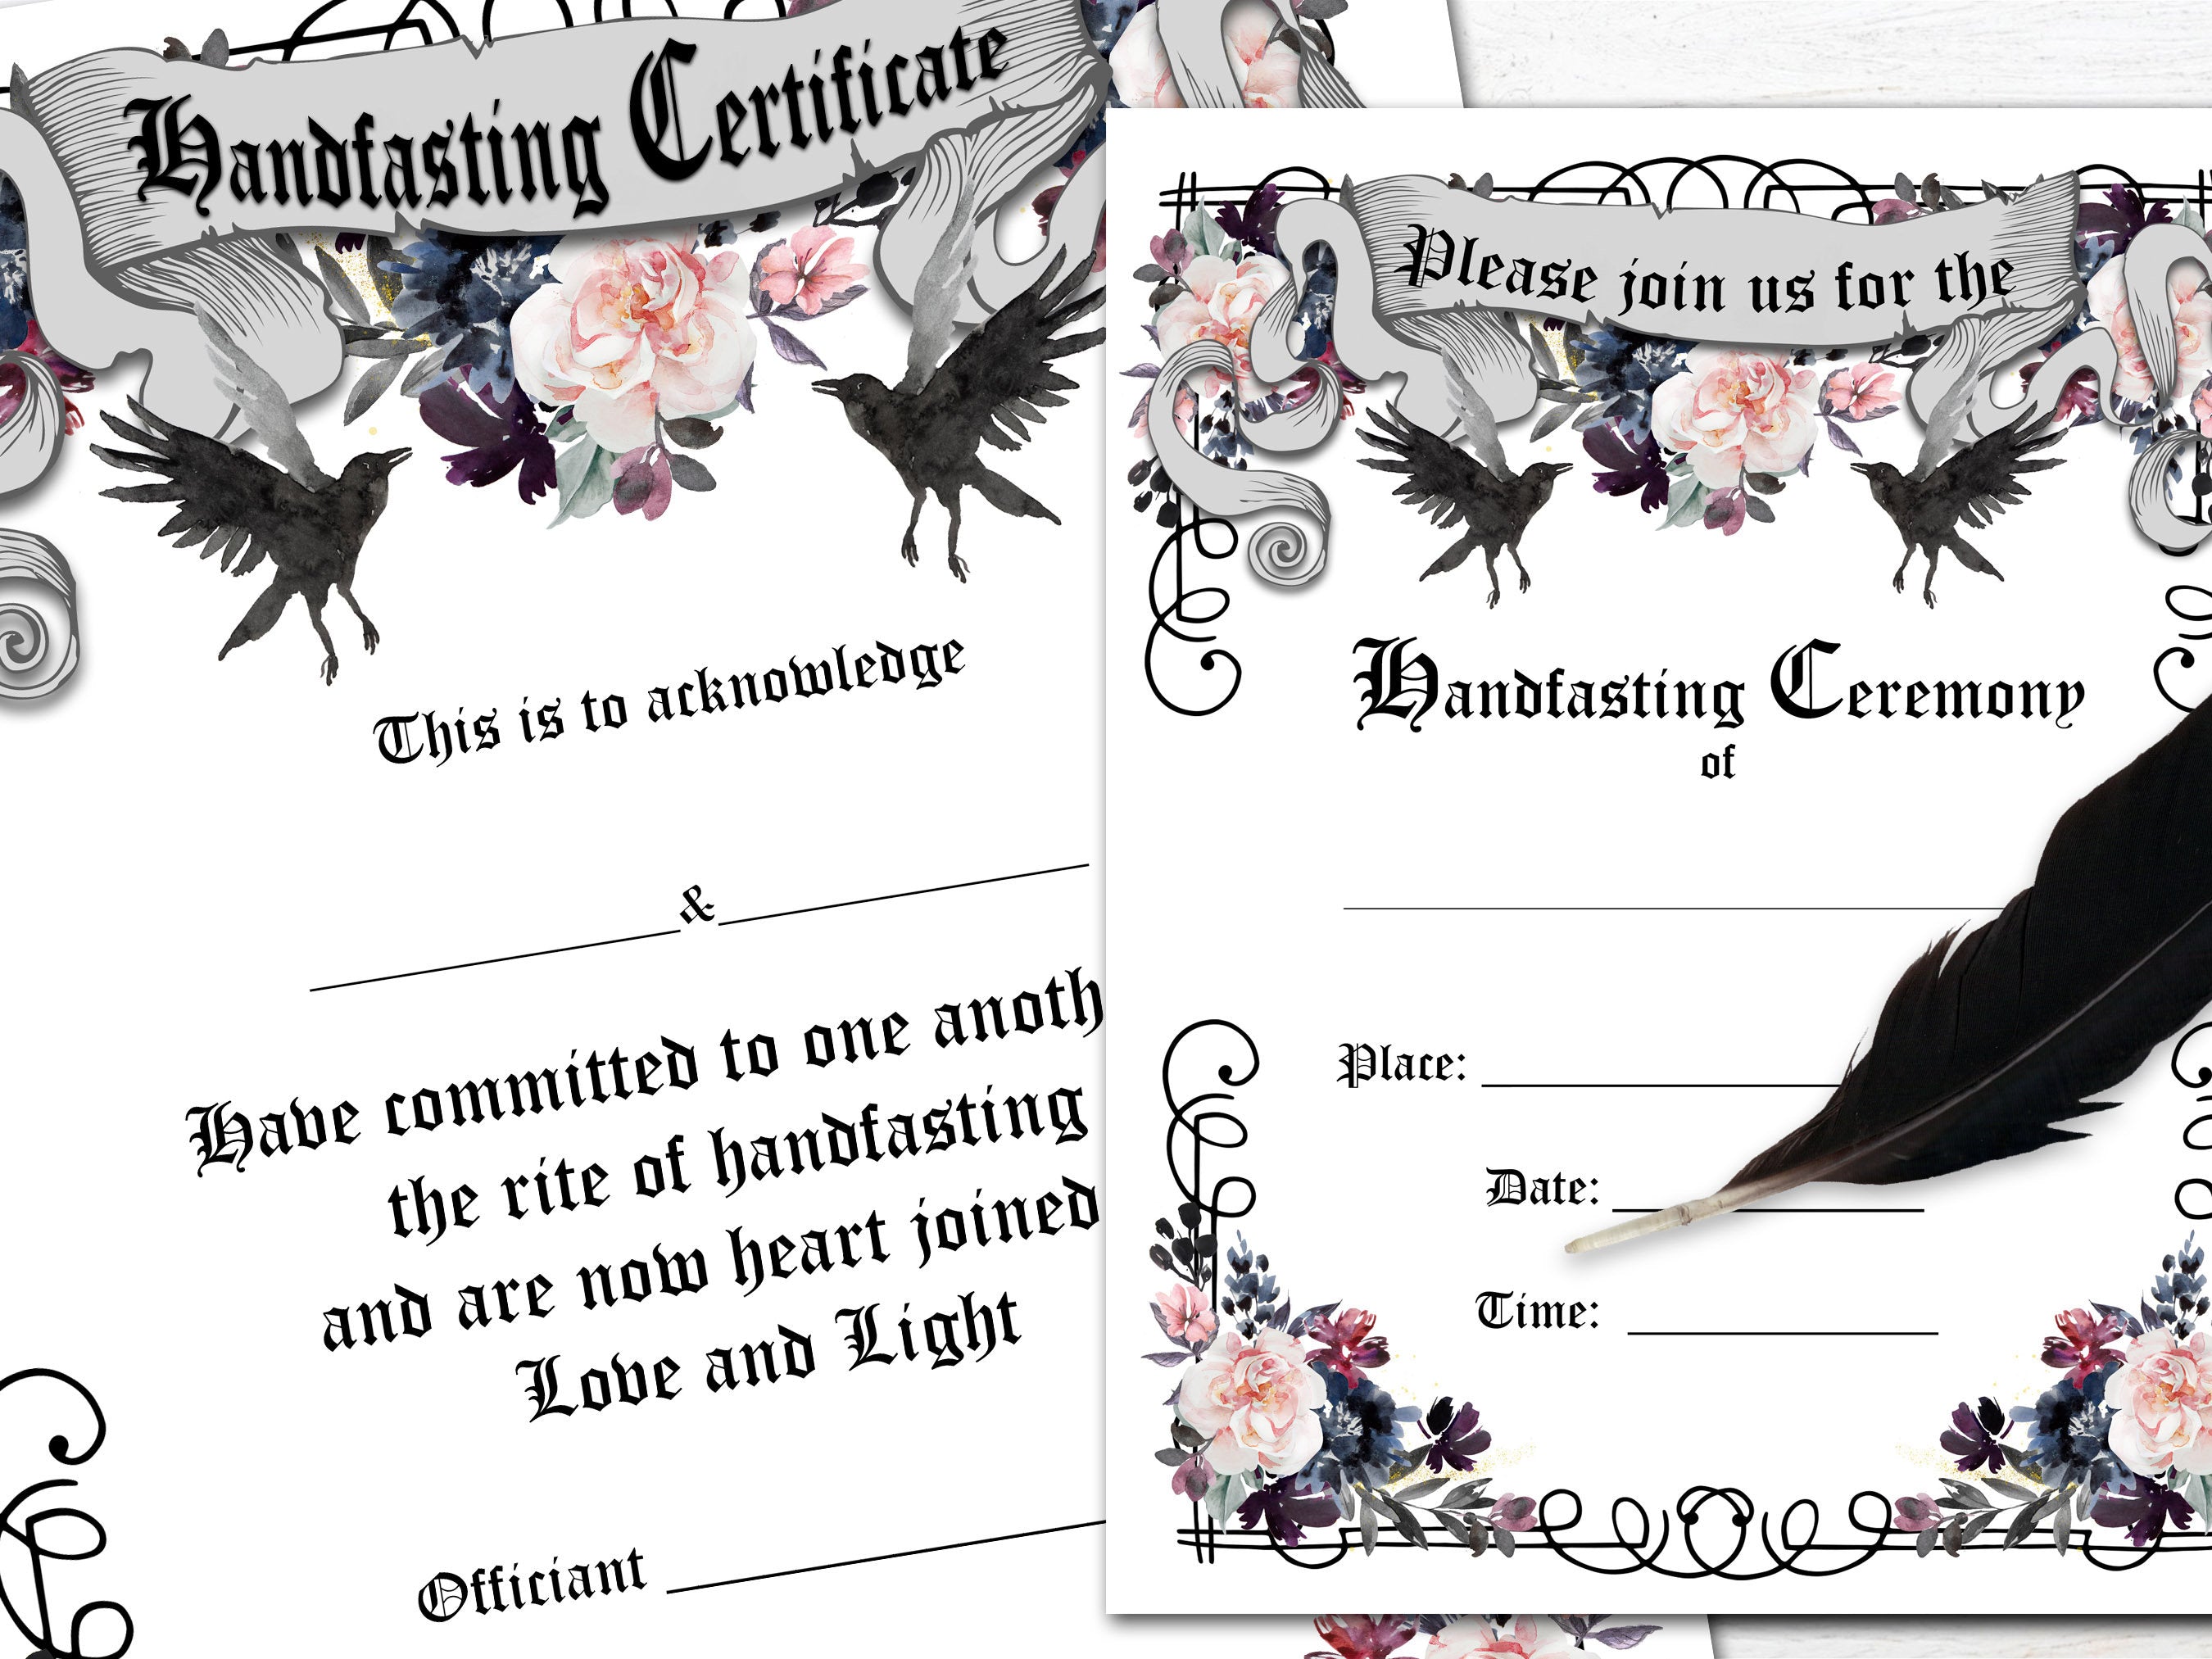 HANDFASTING RAVENS Certificate & Invitation Printable shown with the optional white background.